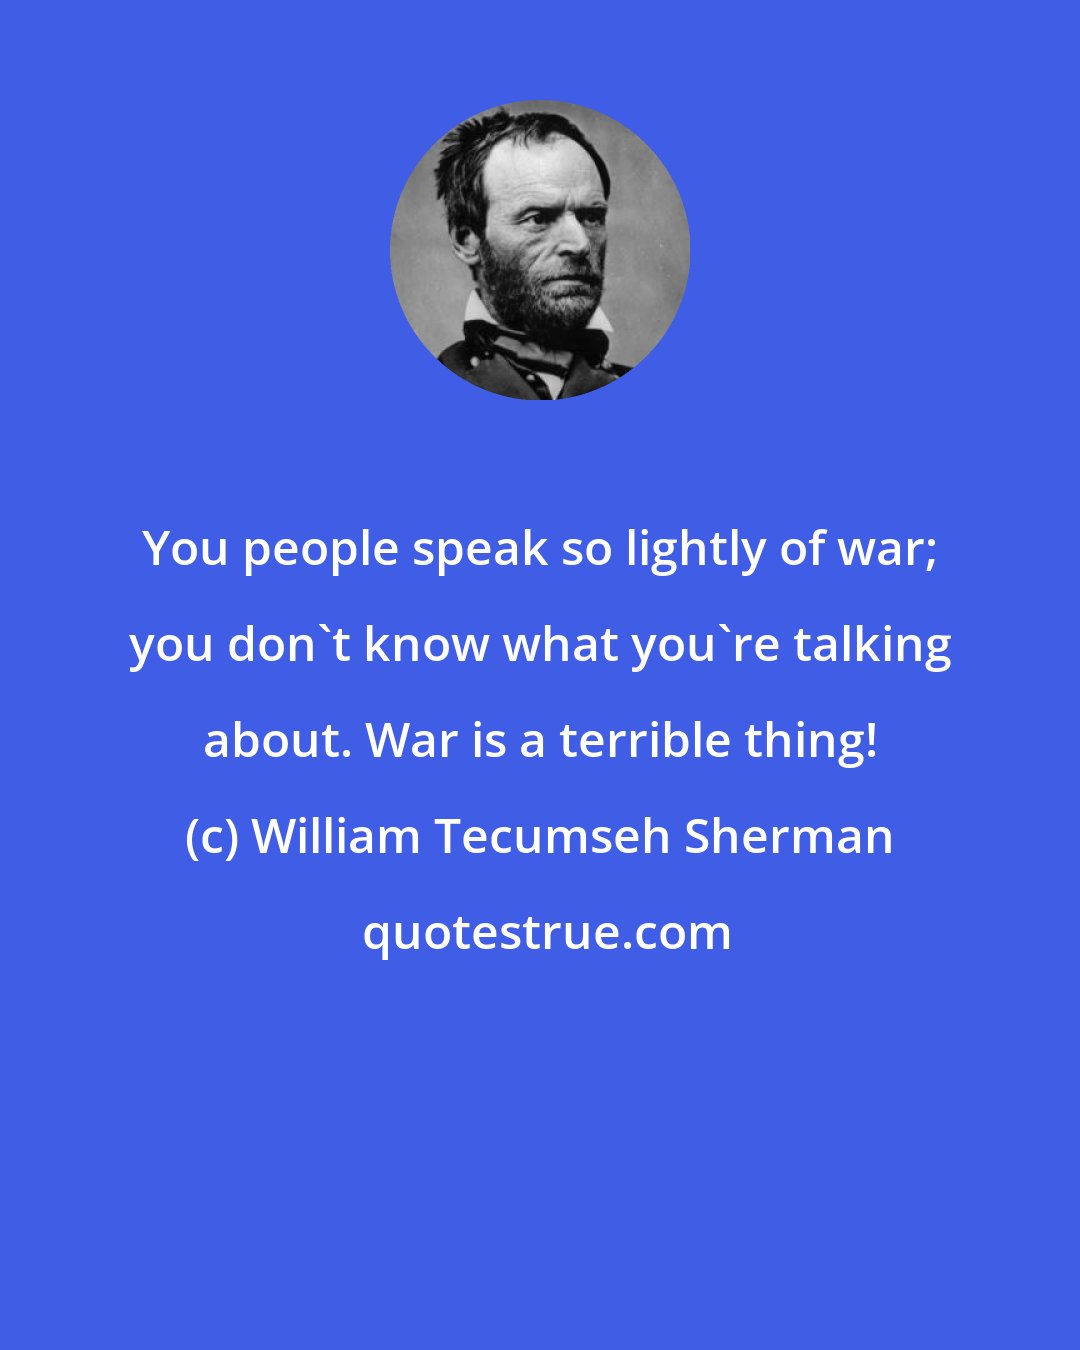 William Tecumseh Sherman: You people speak so lightly of war; you don't know what you're talking about. War is a terrible thing!